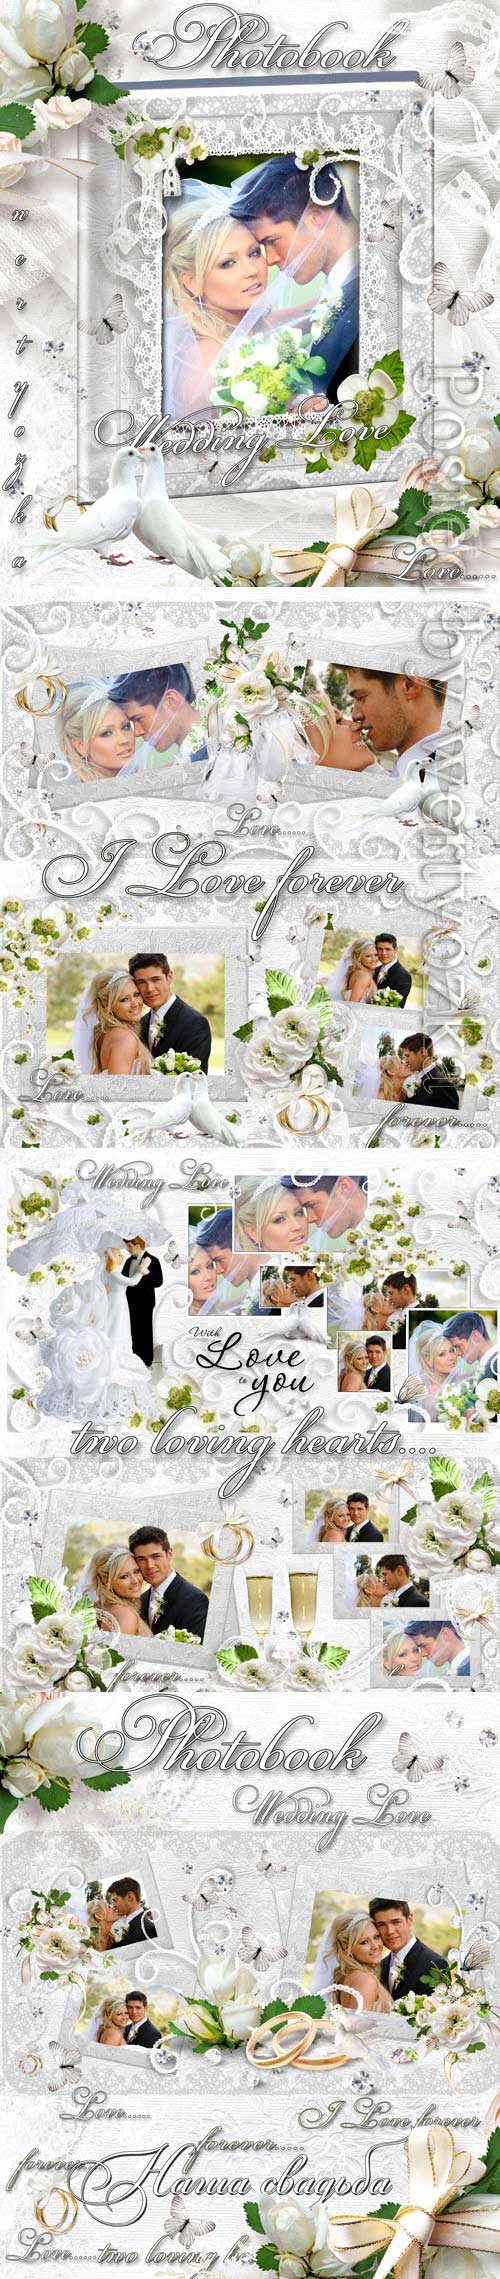 Wedding photo album with white flowers and doves